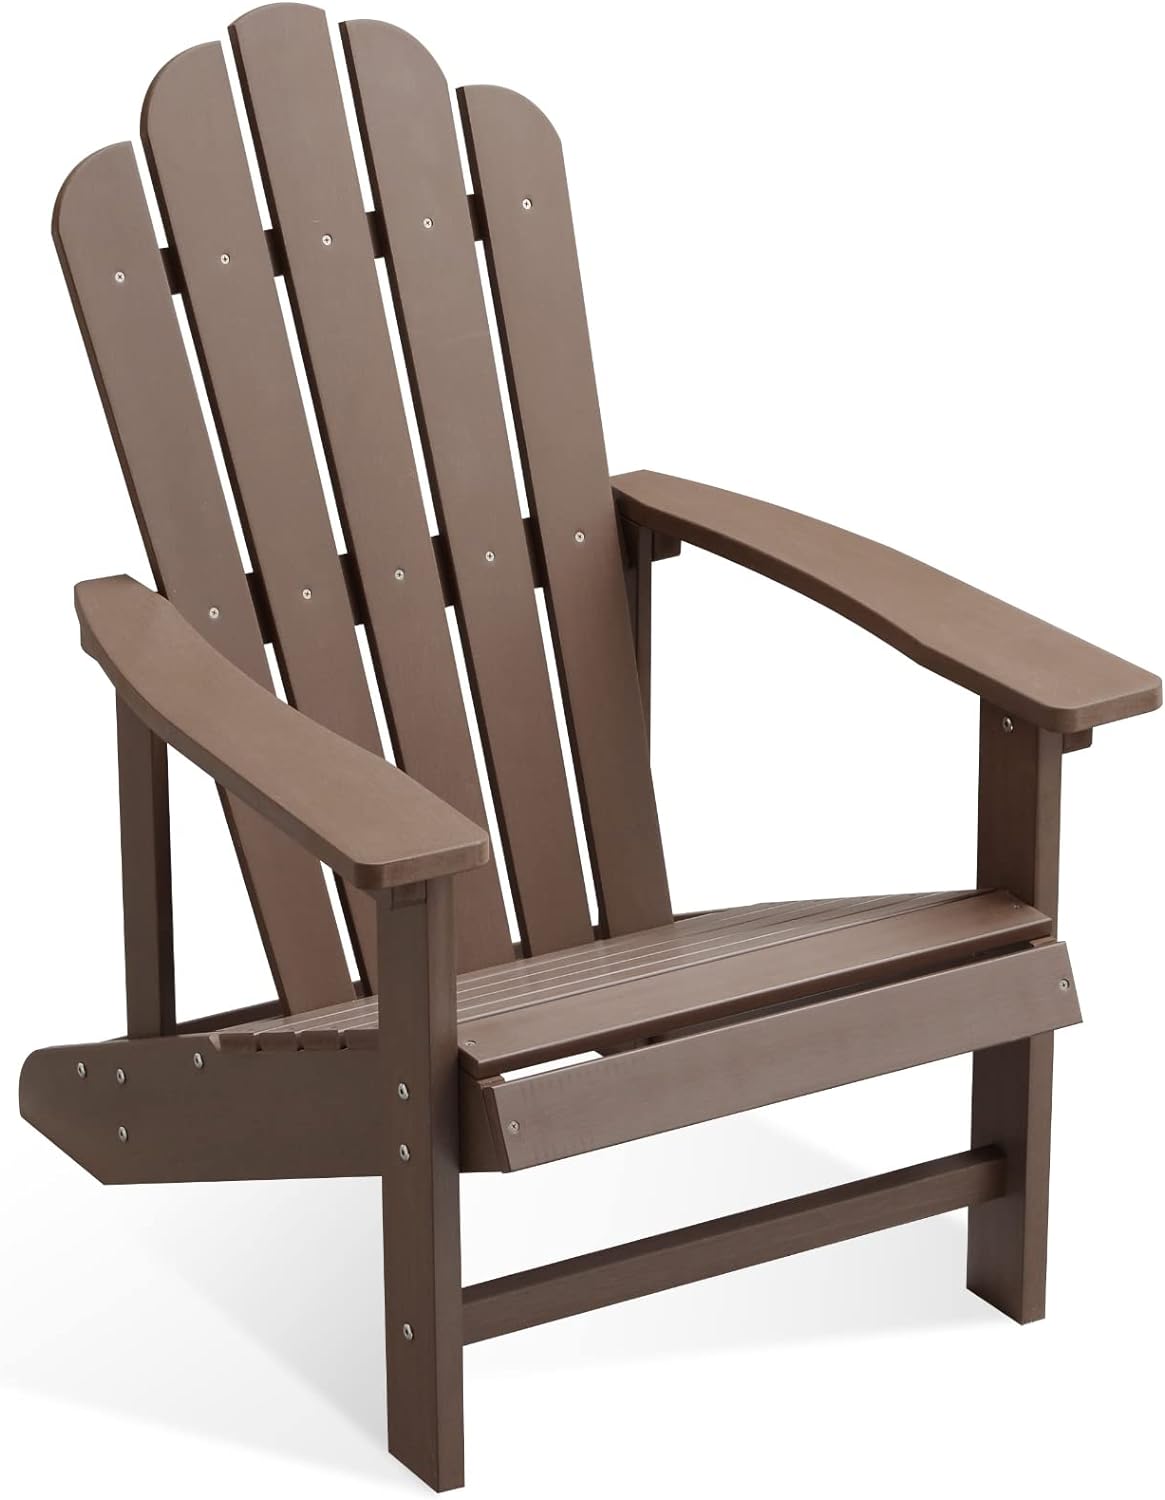 EFURDEN Adirondack Chair, Polystyrene, Weather Resistant & Durable Fire Pits Chair for Lawn and Garden, 350 lbs Load Capacity with Easy Assembly (Brown, 1 pc)